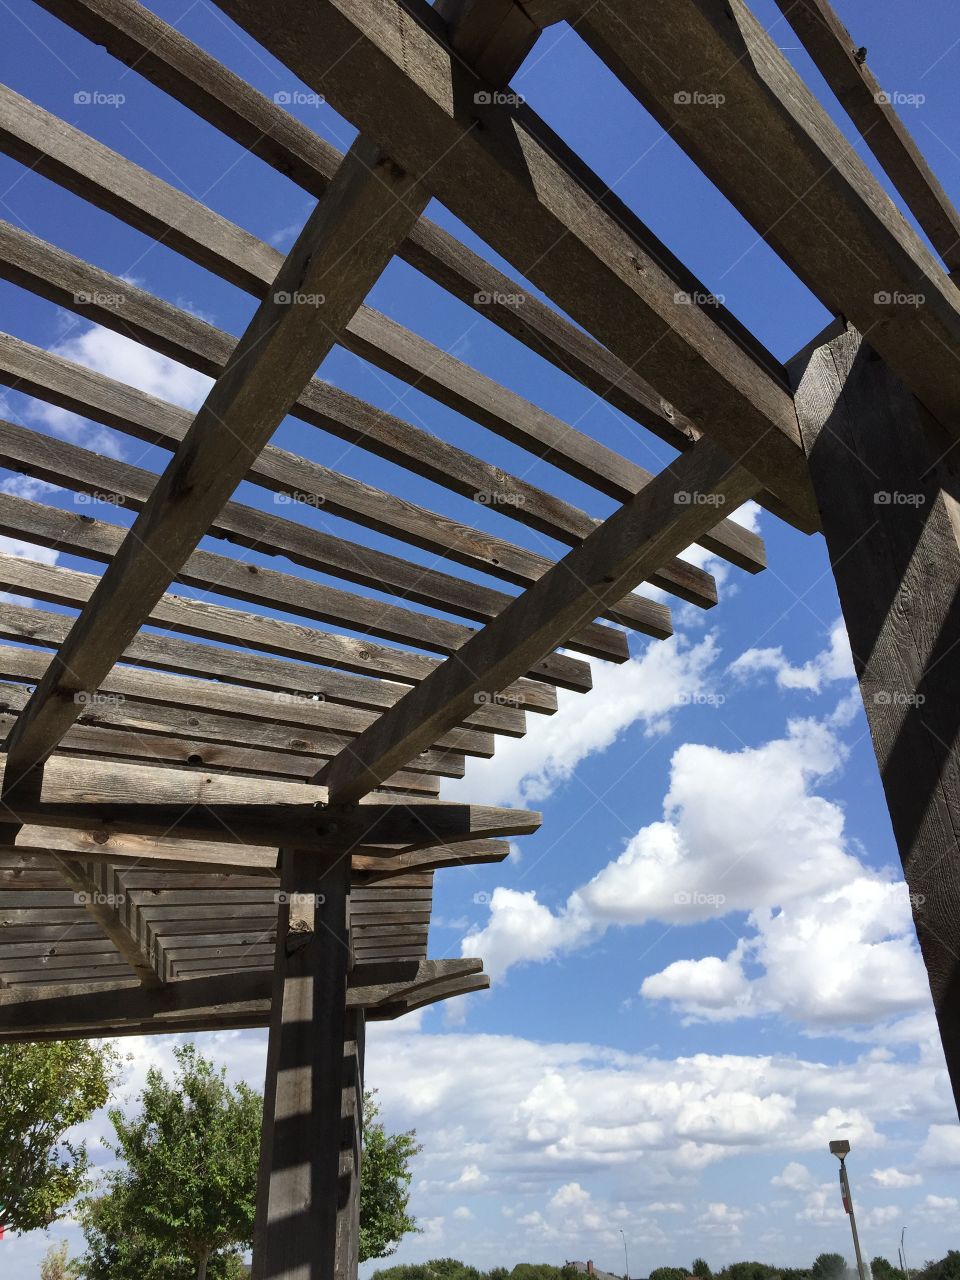 Under the pergola. Vibrant sky and clouds seen when looking up under the pergola at Abilene Christian University 